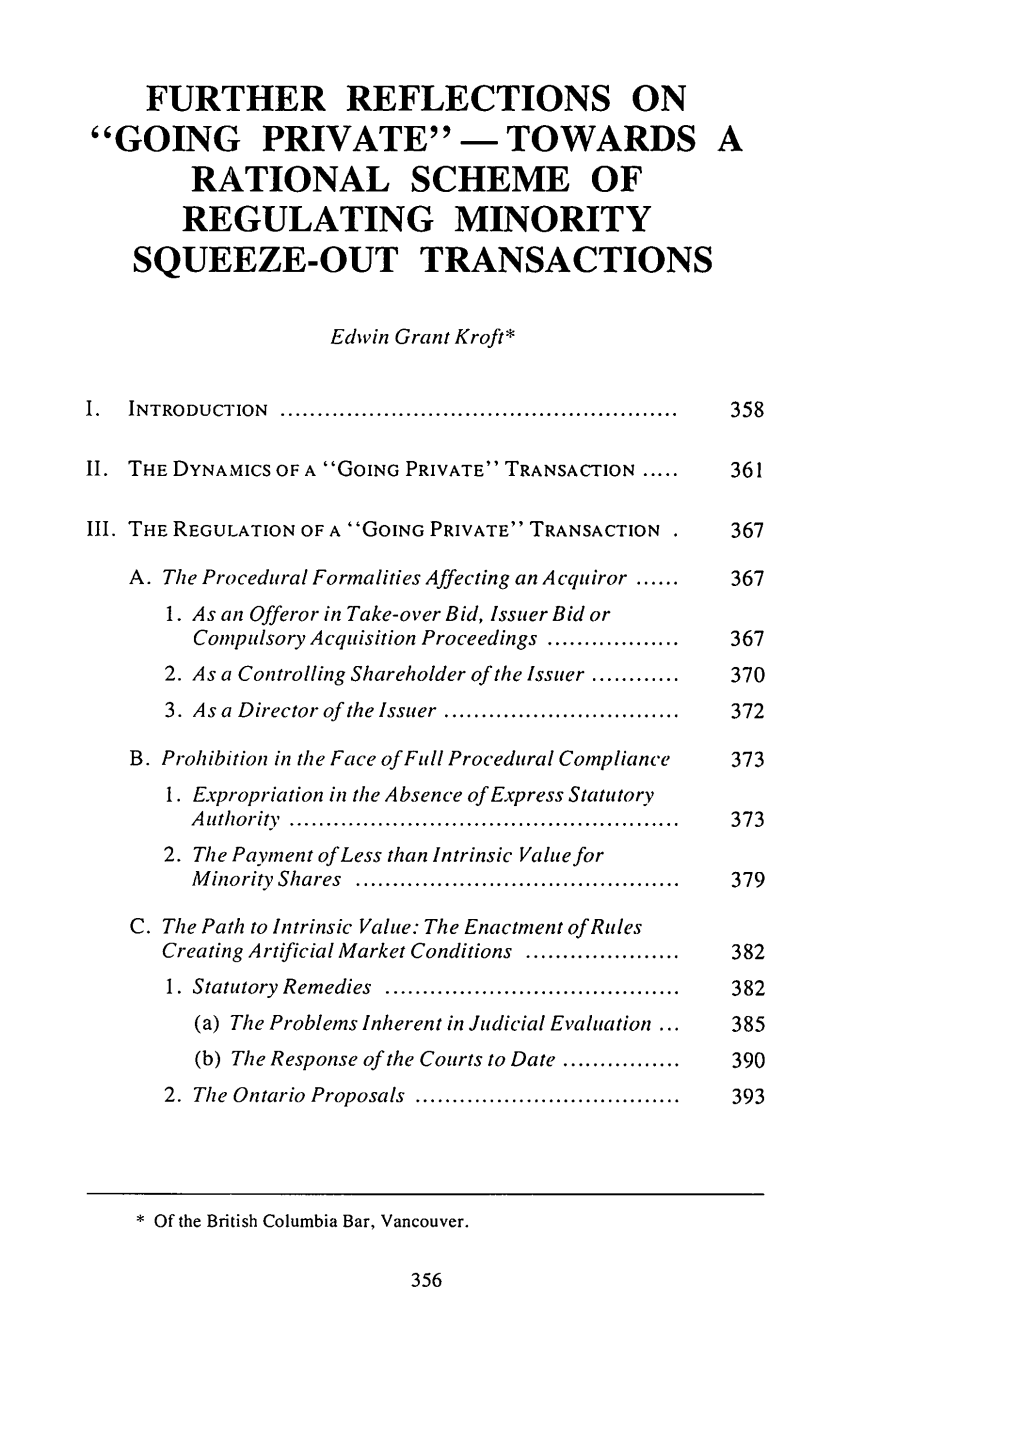 Rational Scheme of Regulating Minority Squeeze-Out Transactions